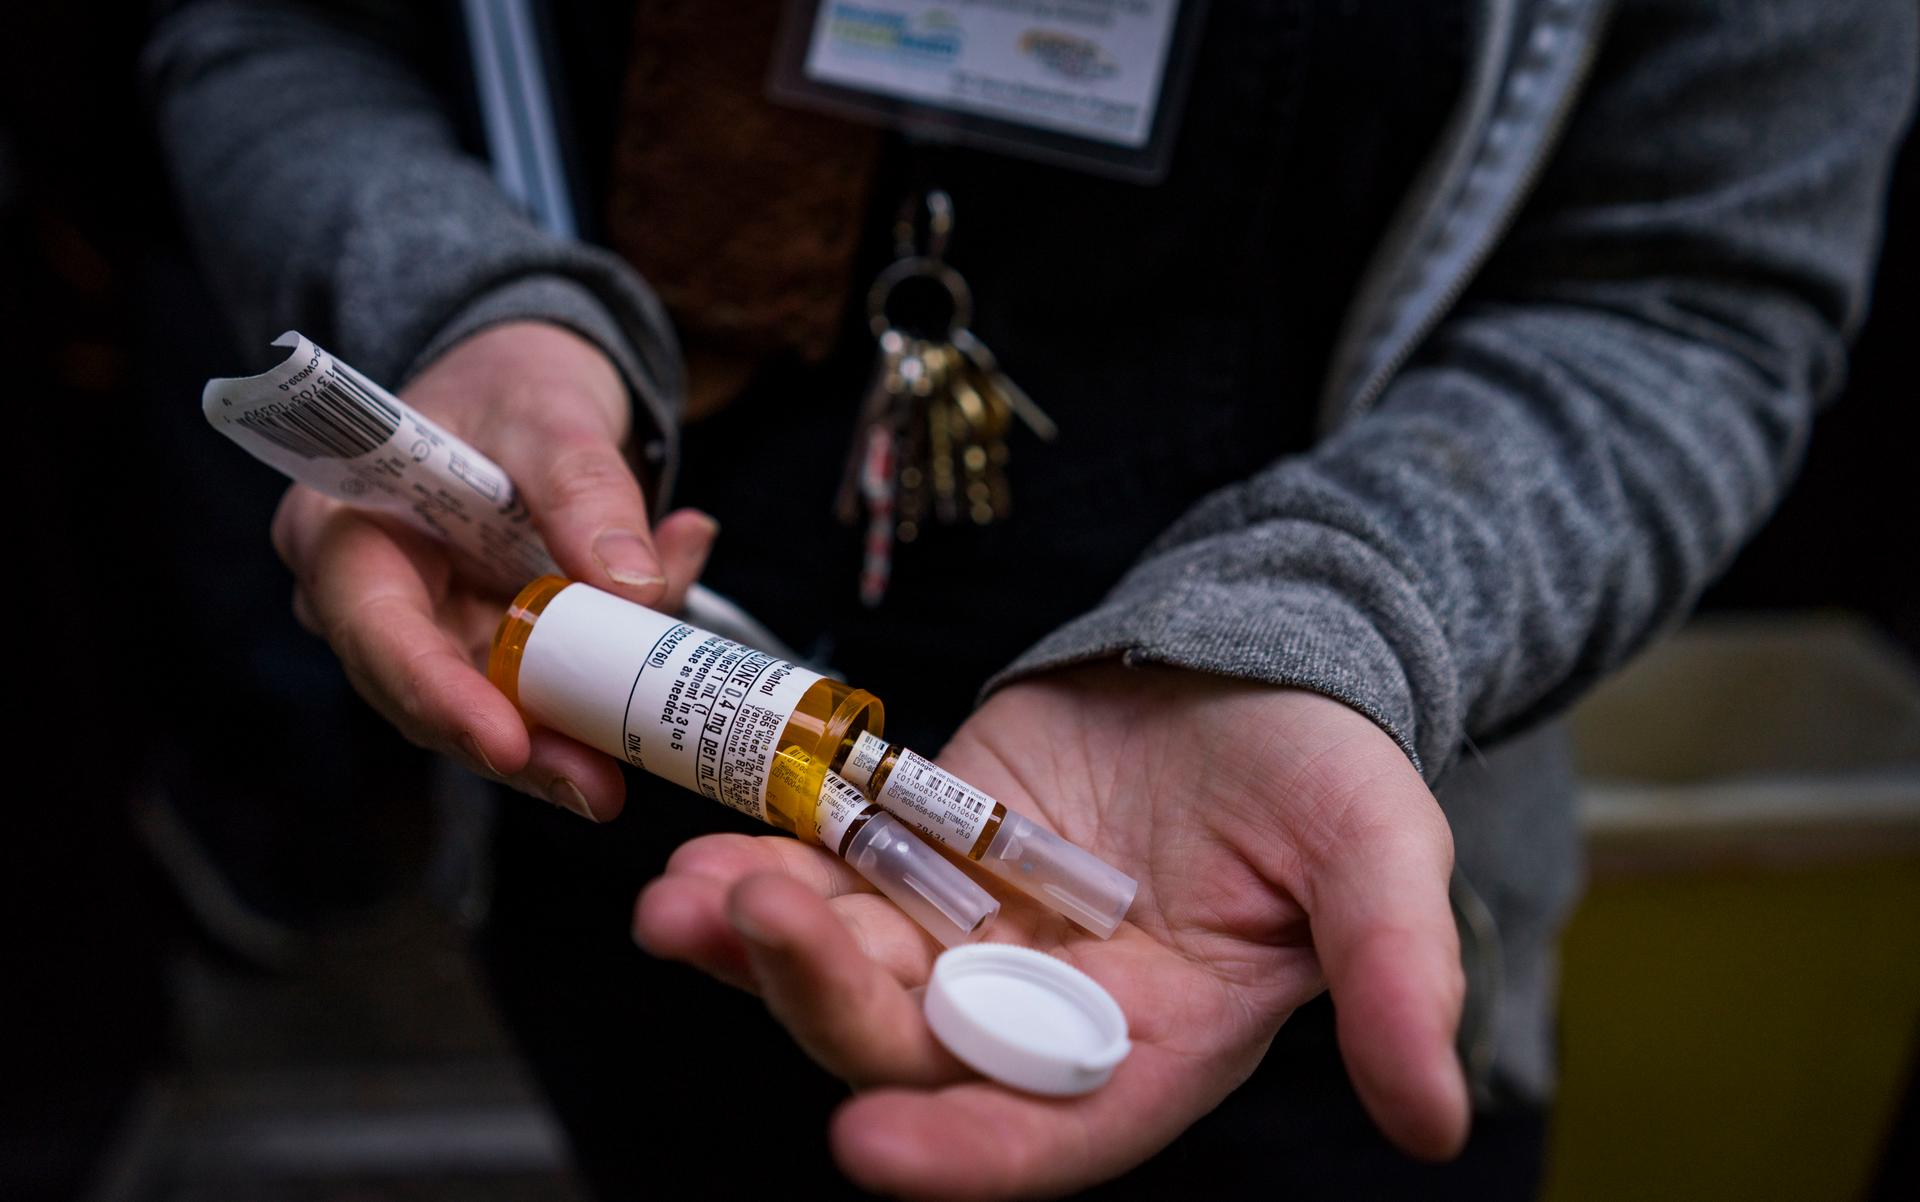 an overdose naloxone kit in a woman's hands